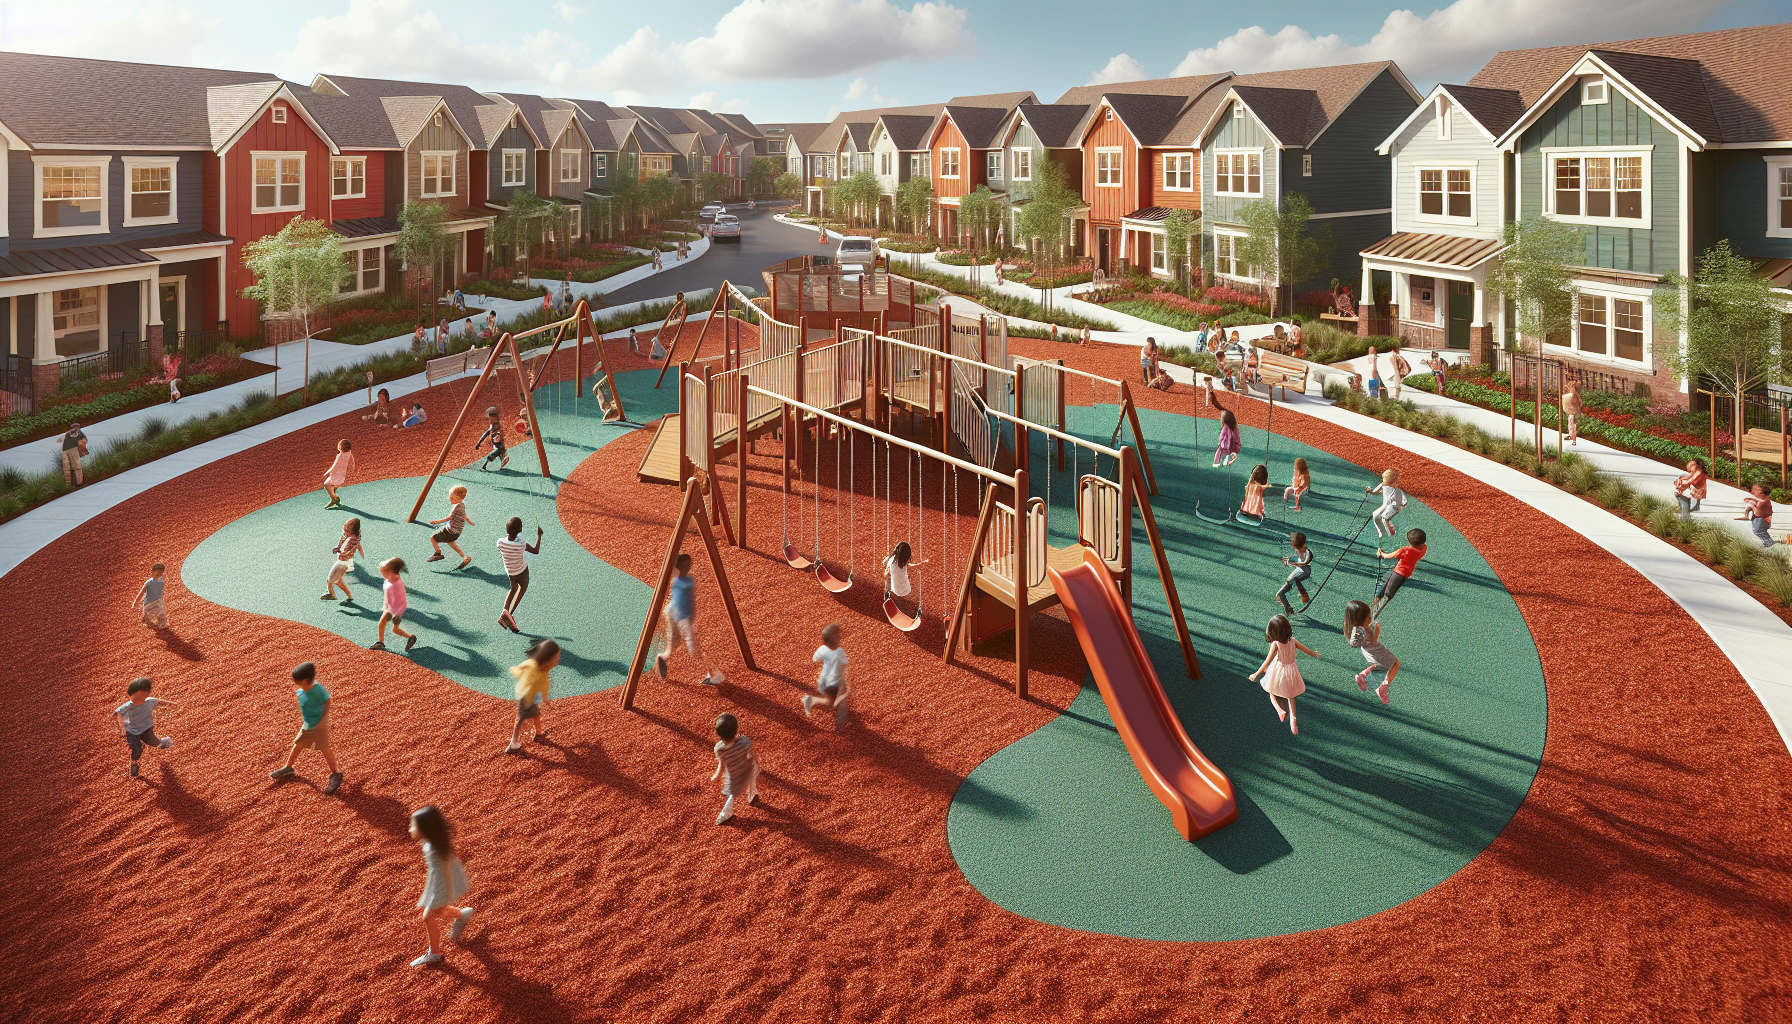 IPEMA certified rubber mulch for residential and commercial playgrounds